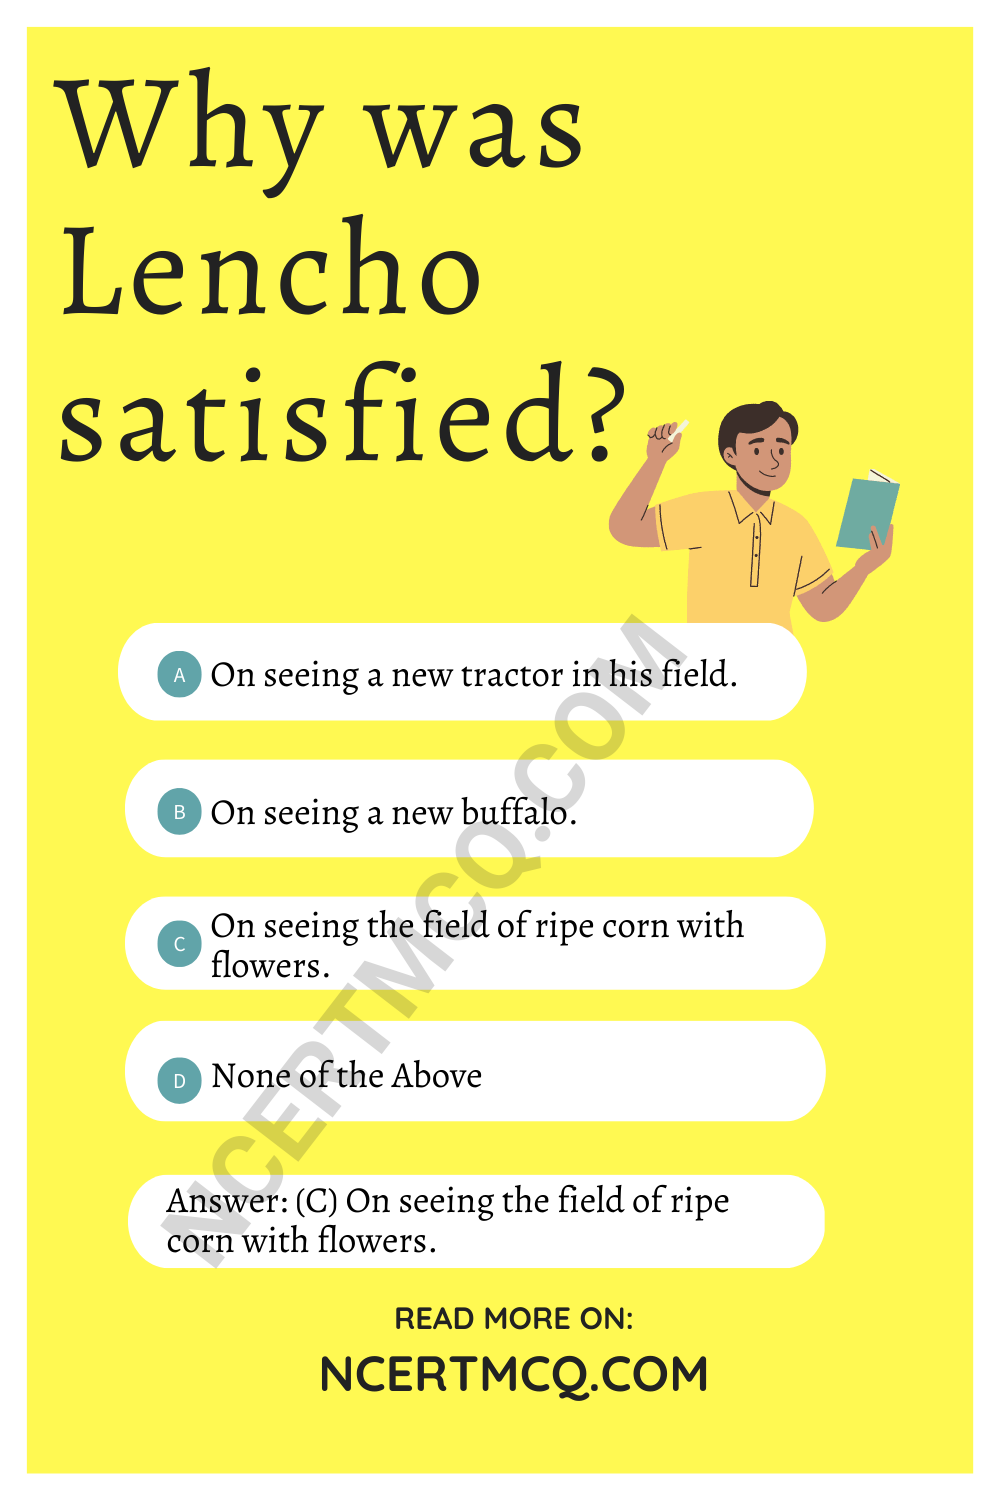 Why was Lencho satisfied?